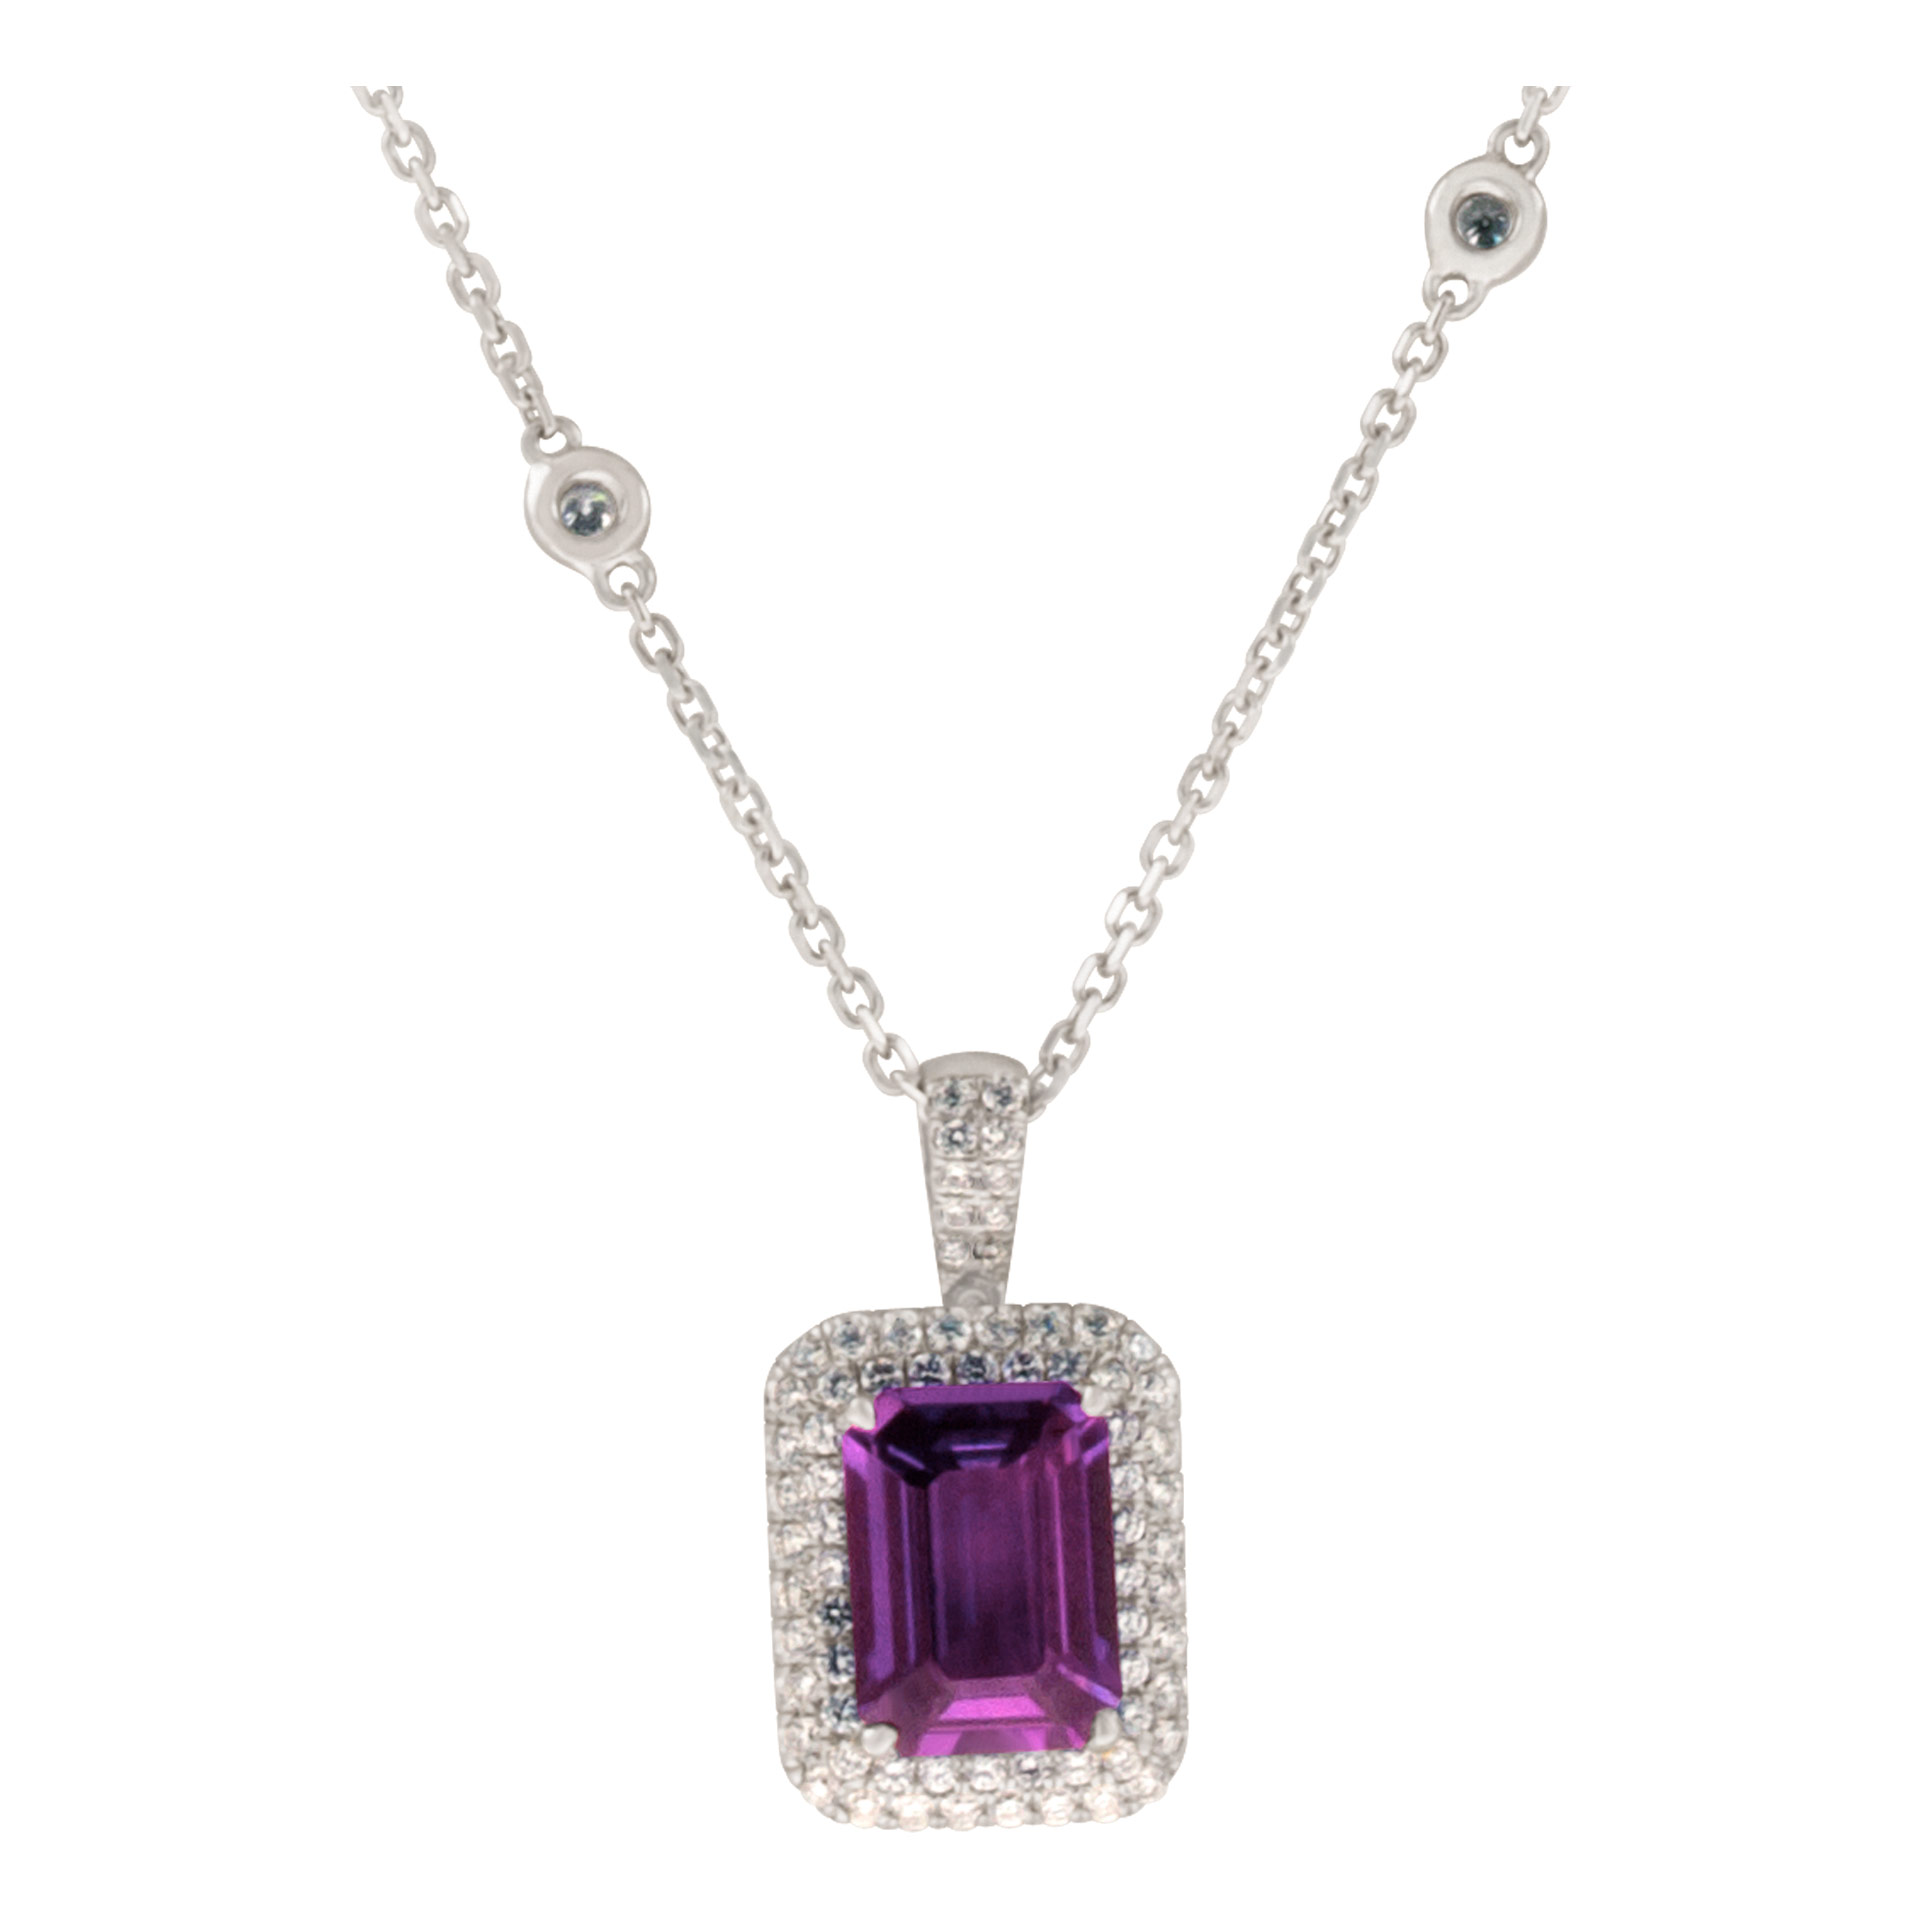 Purple sapphire pendant necklace in 18k white gold with diamond accents. 3.87 carat sapphire image 1